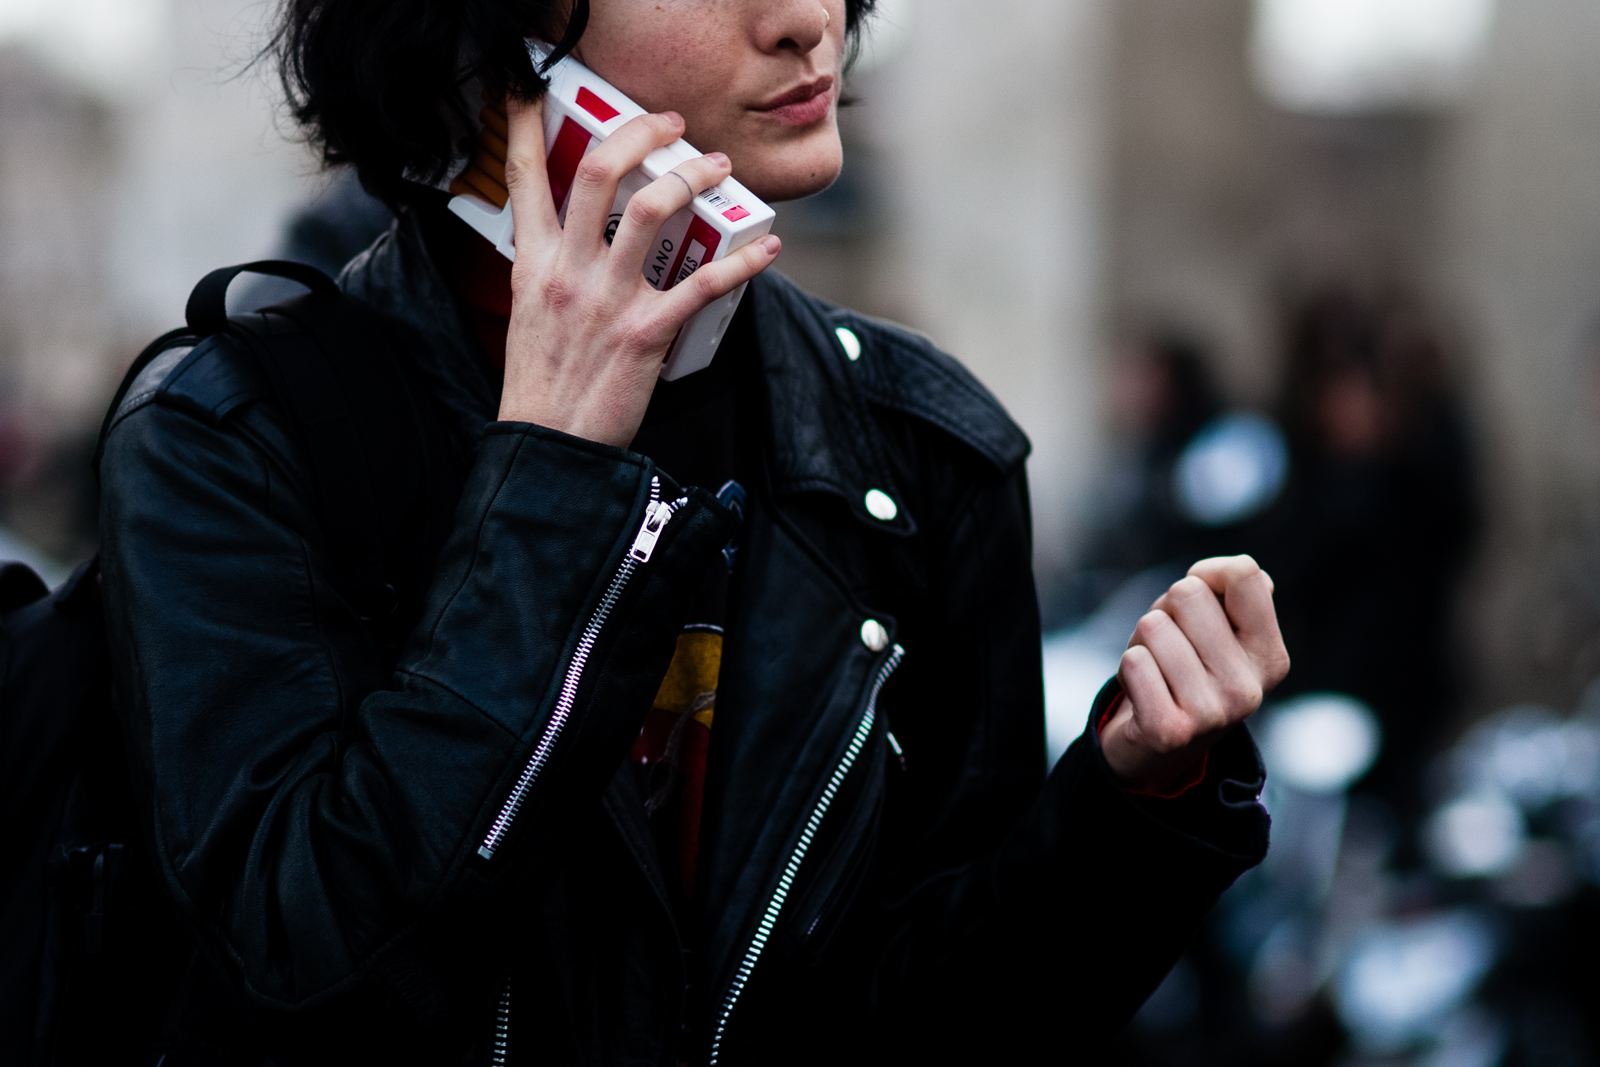 Model off duty Heather Kemesky talking on the phone after a fashion show in Paris, France